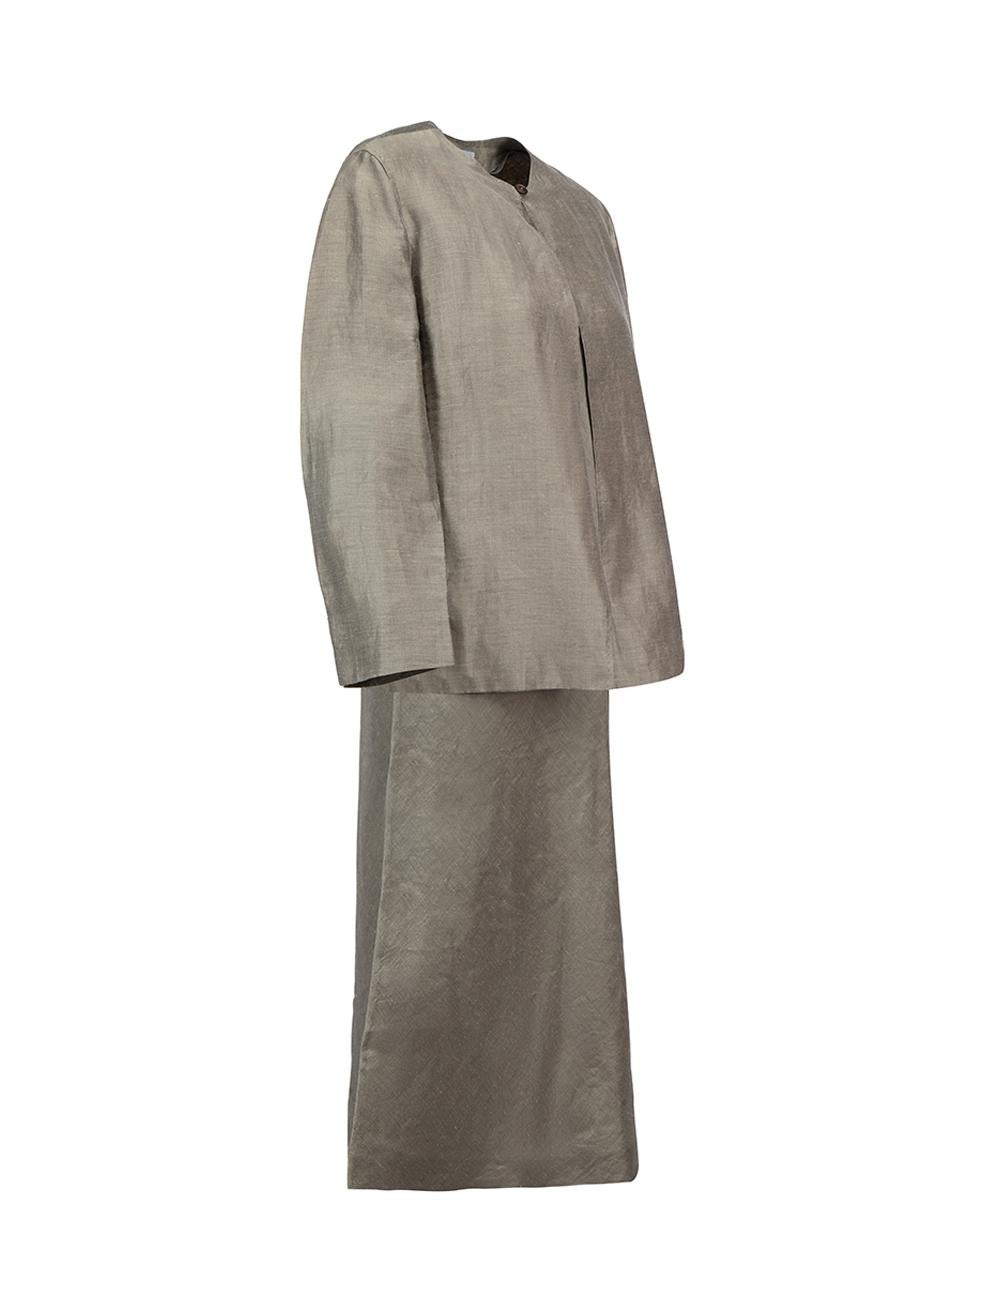 CONDITION is Very good. Hardly any visible wear to set is evident on this used Max Mara designer resale item.



Details


Grey

Linen

Jacket and dress set

Long sleeve jacket

Round neckline

1x Top button fastening

2x Side pockets

A-line